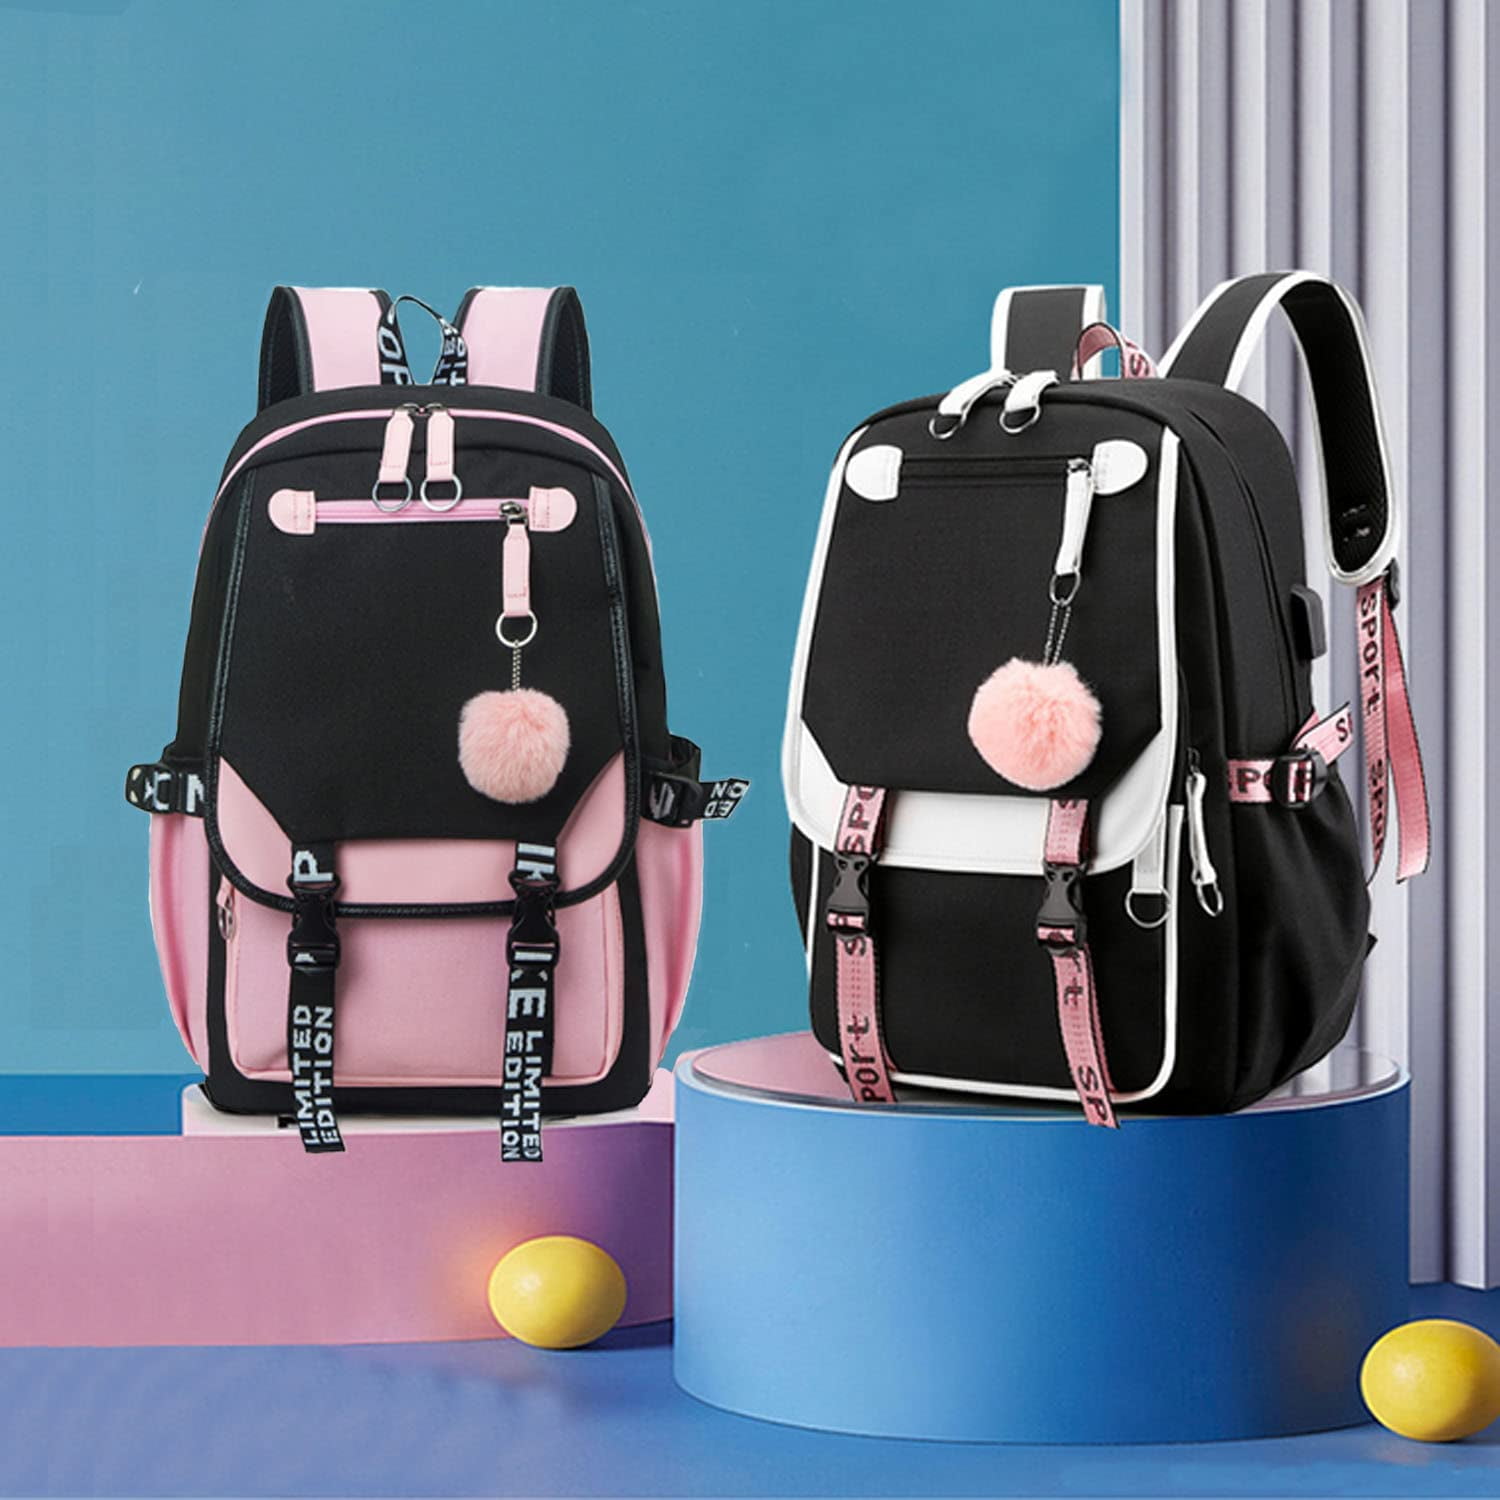 Hascupxs Black Casual Pink Student Backpack Set Daypack Lightweight Girls Laptop Backpack with Insulated Lunch Box School Bookbags for Fans Gifts